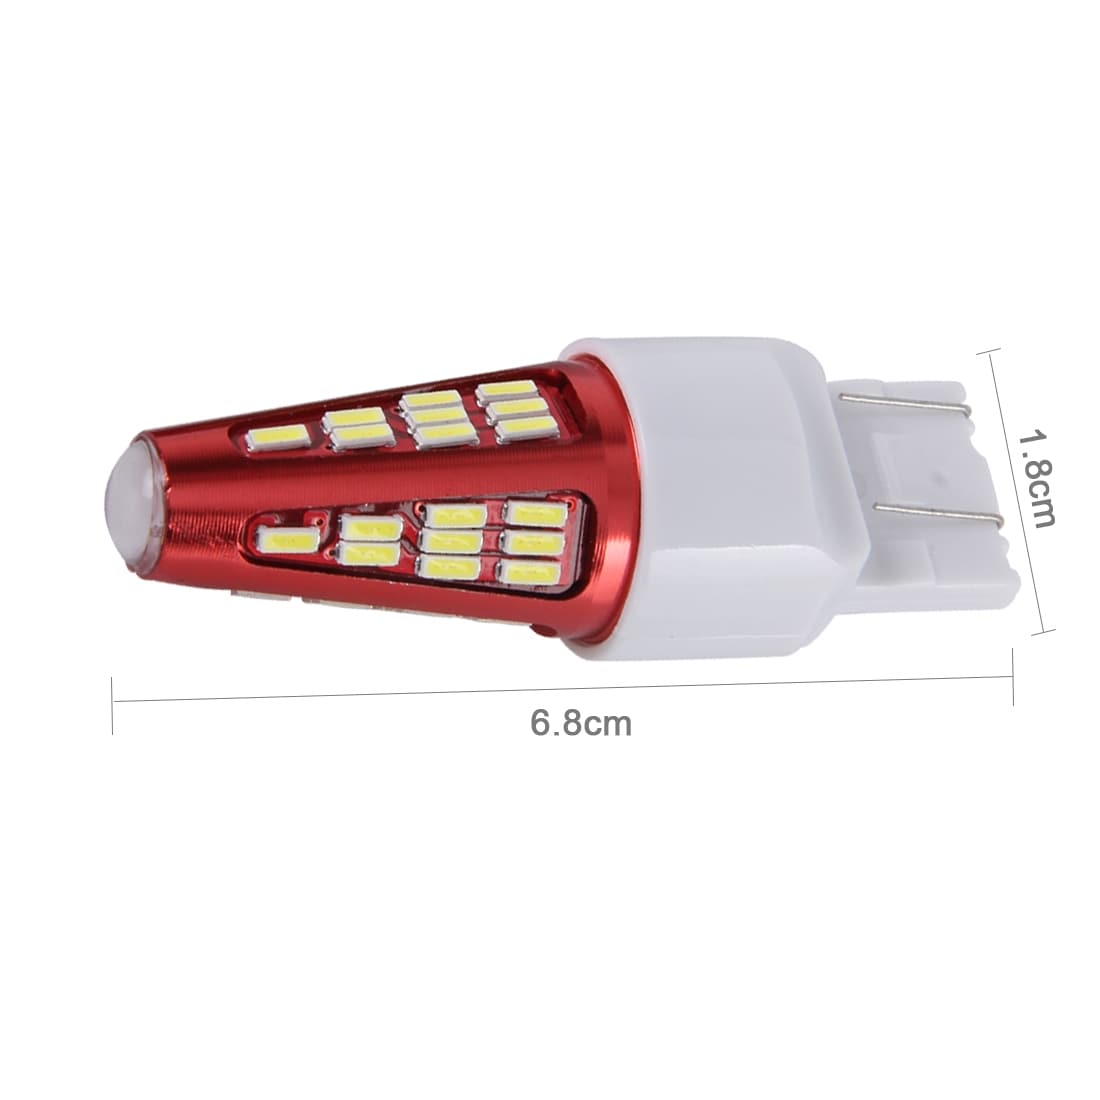 Led lampa T20 7443 10W 800LM 6000K 48 SMD-4014 Canbus - 2Pack